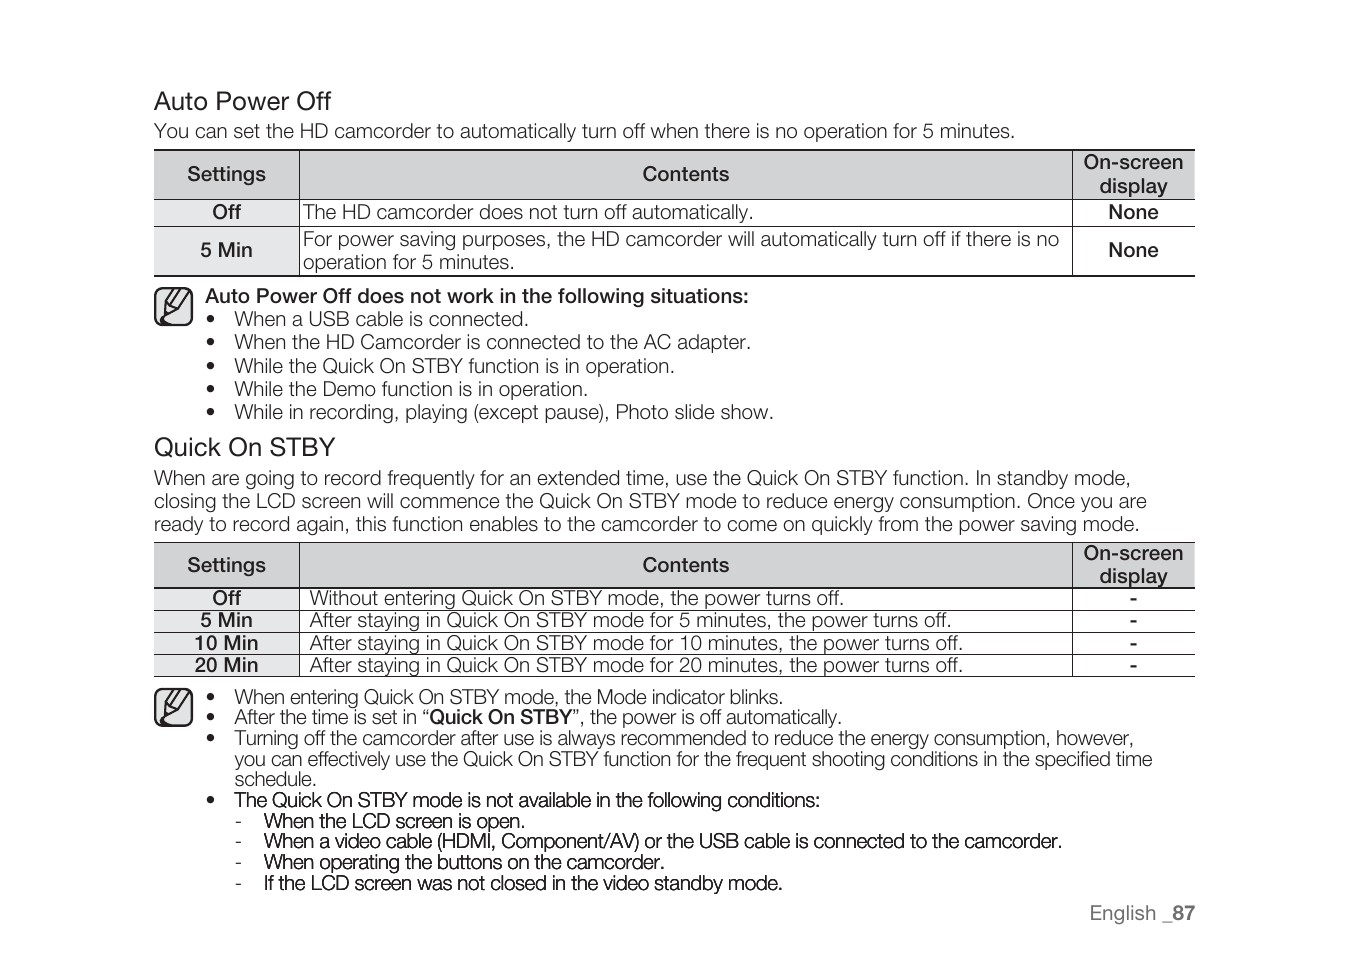 Auto power off, Quick on stby | Samsung HMX-H1062SP User Manual | Page 97 / 144